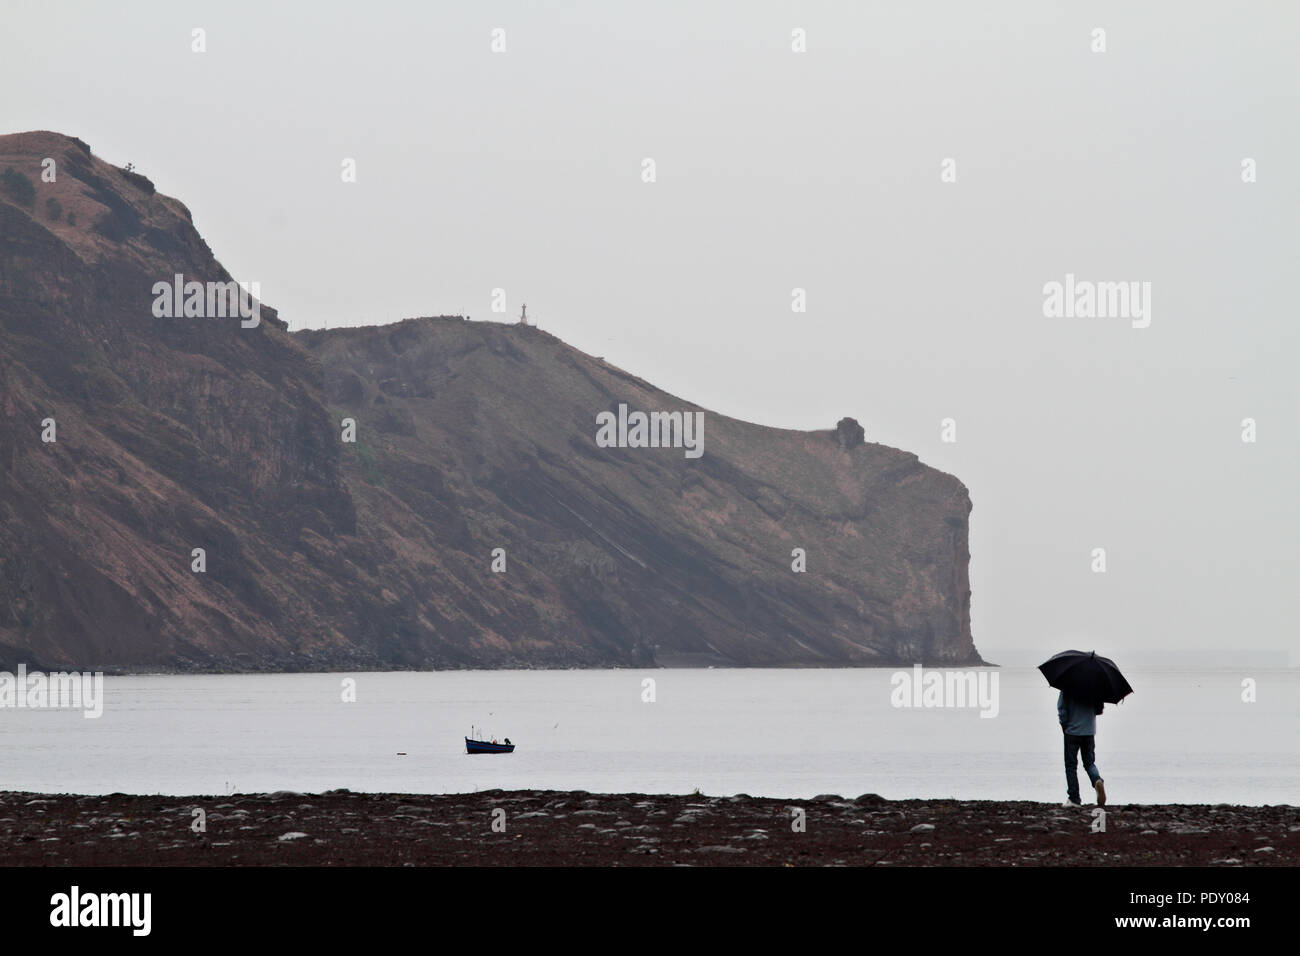 A man walking along the shore line on Madeira island on a rainy day Stock Photo